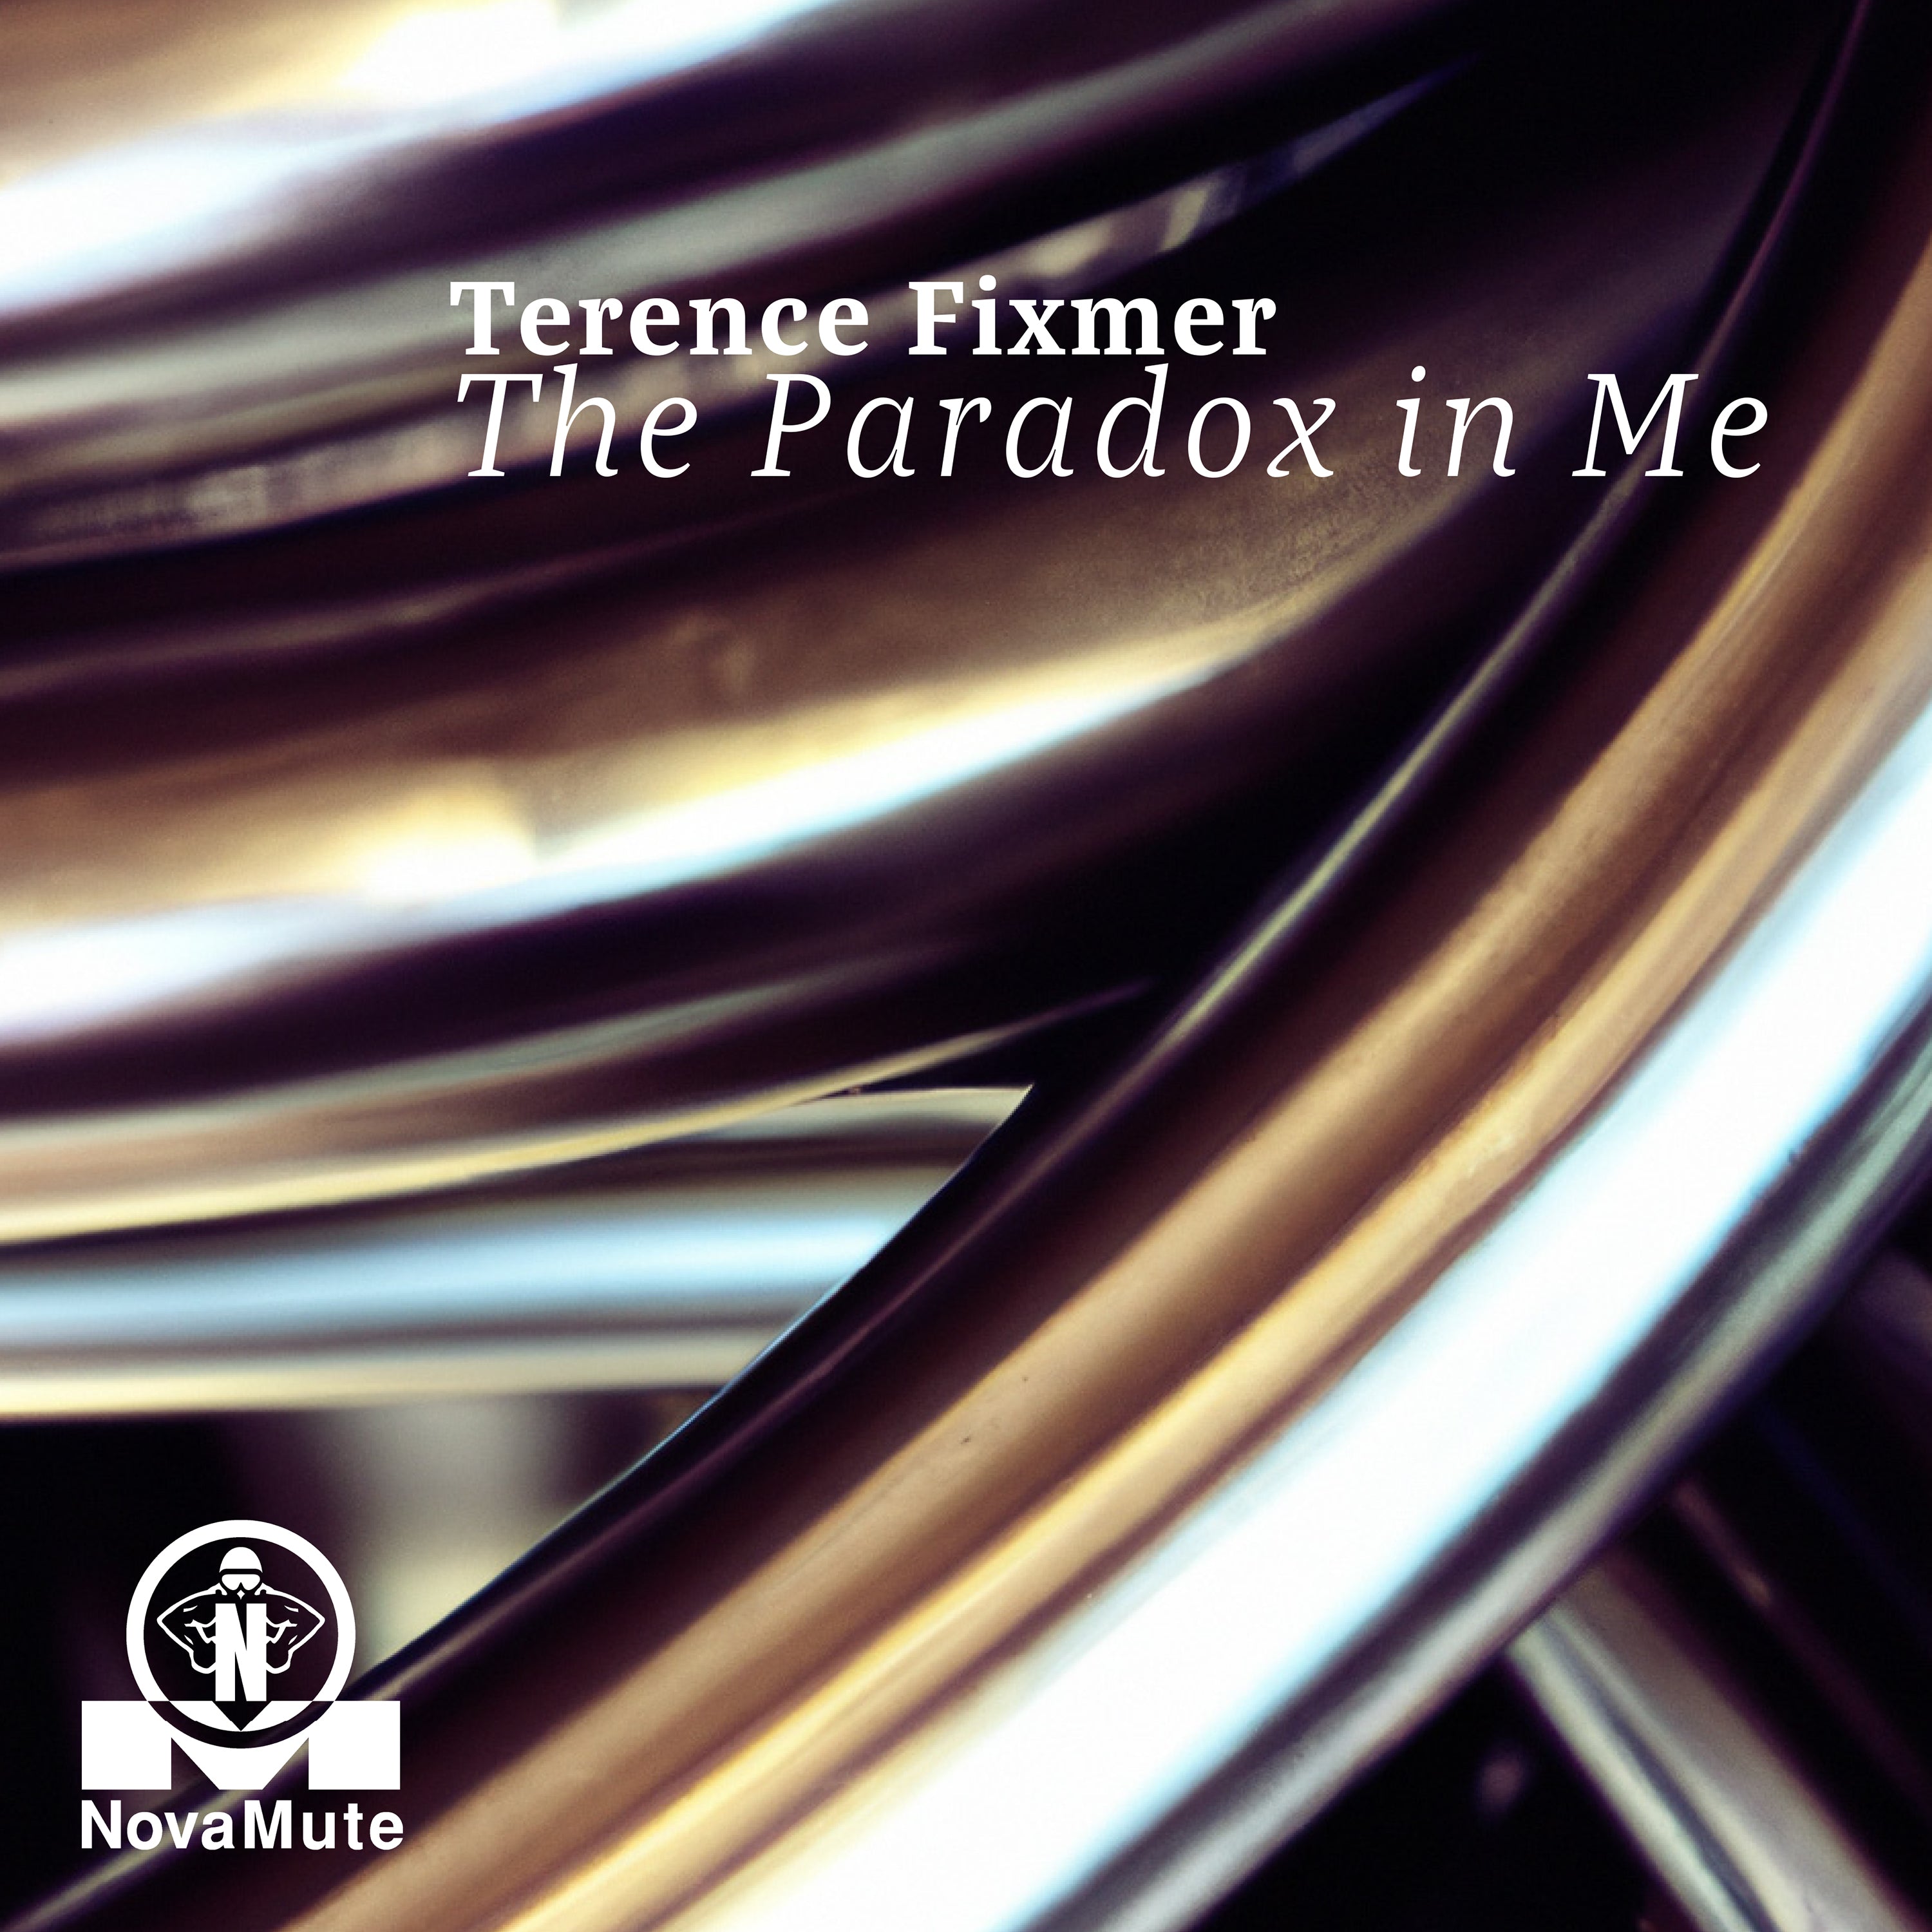 Terence Fixmer - The Paradox in Me: Vinyl 12" EP